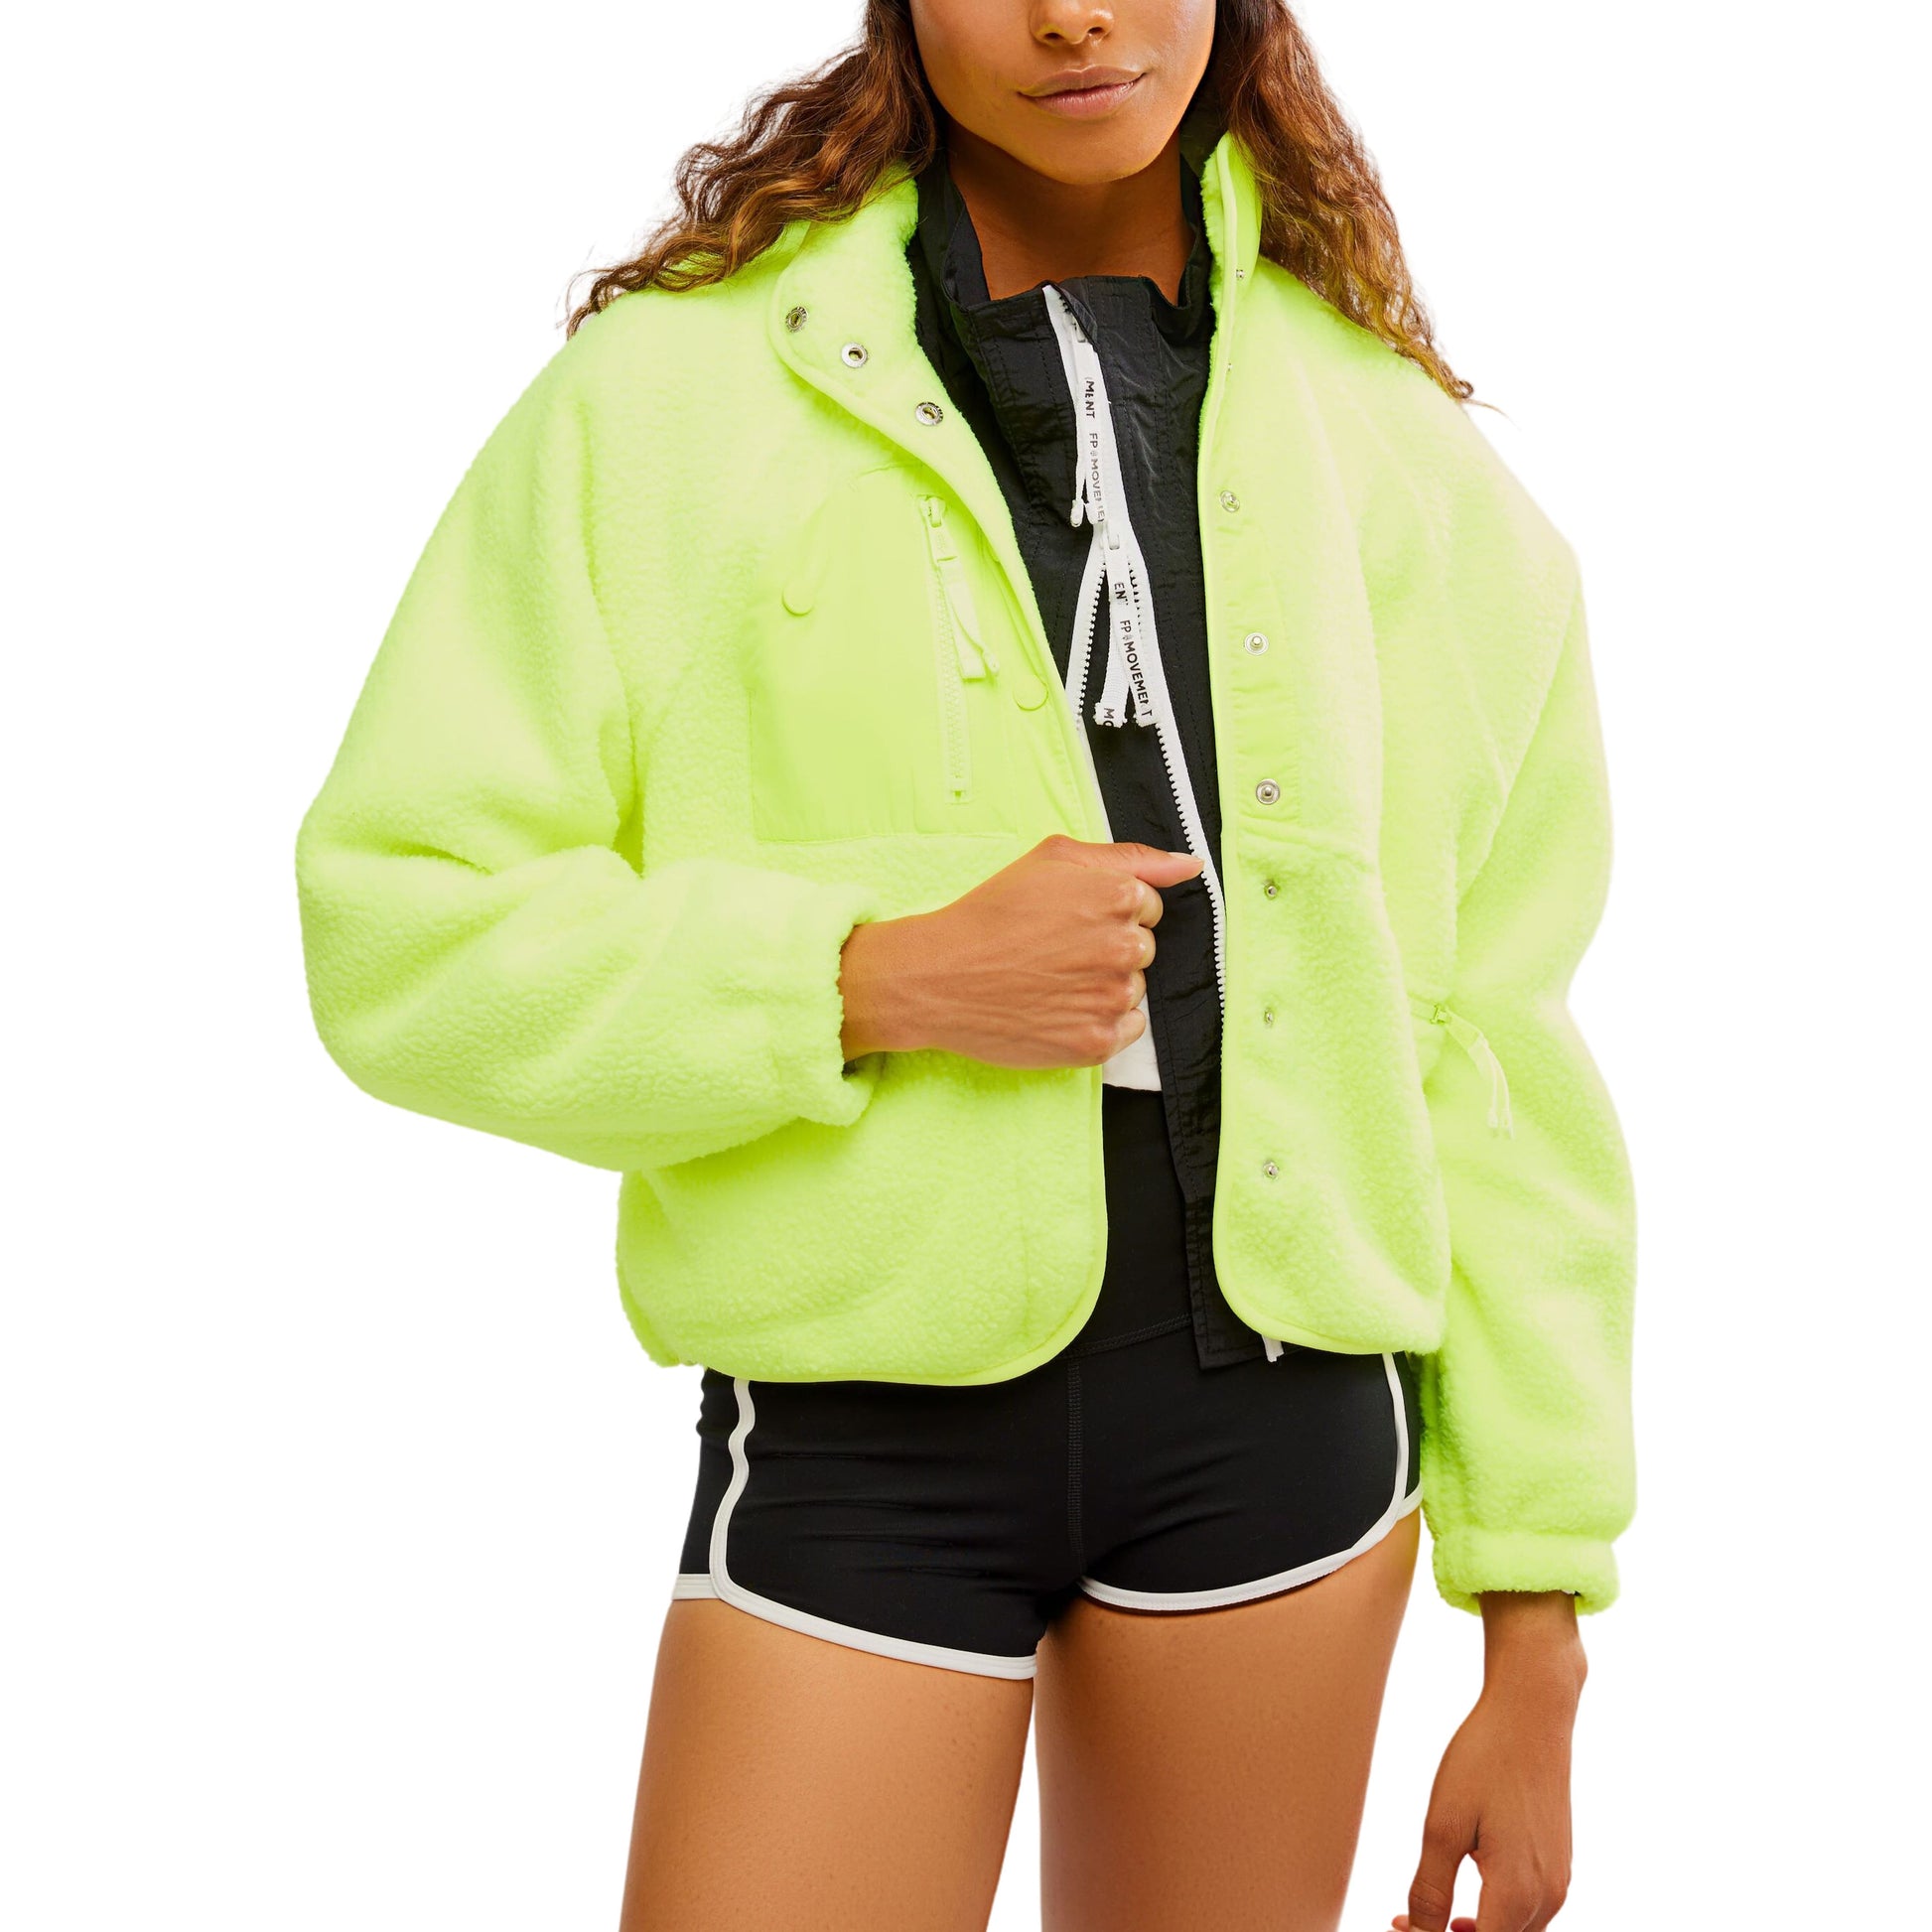 Woman in a Free People Movement Hit The Slopes Jacket in Highlighter with zippered pockets and black shorts, standing with one hand adjusting the jacket zipper.